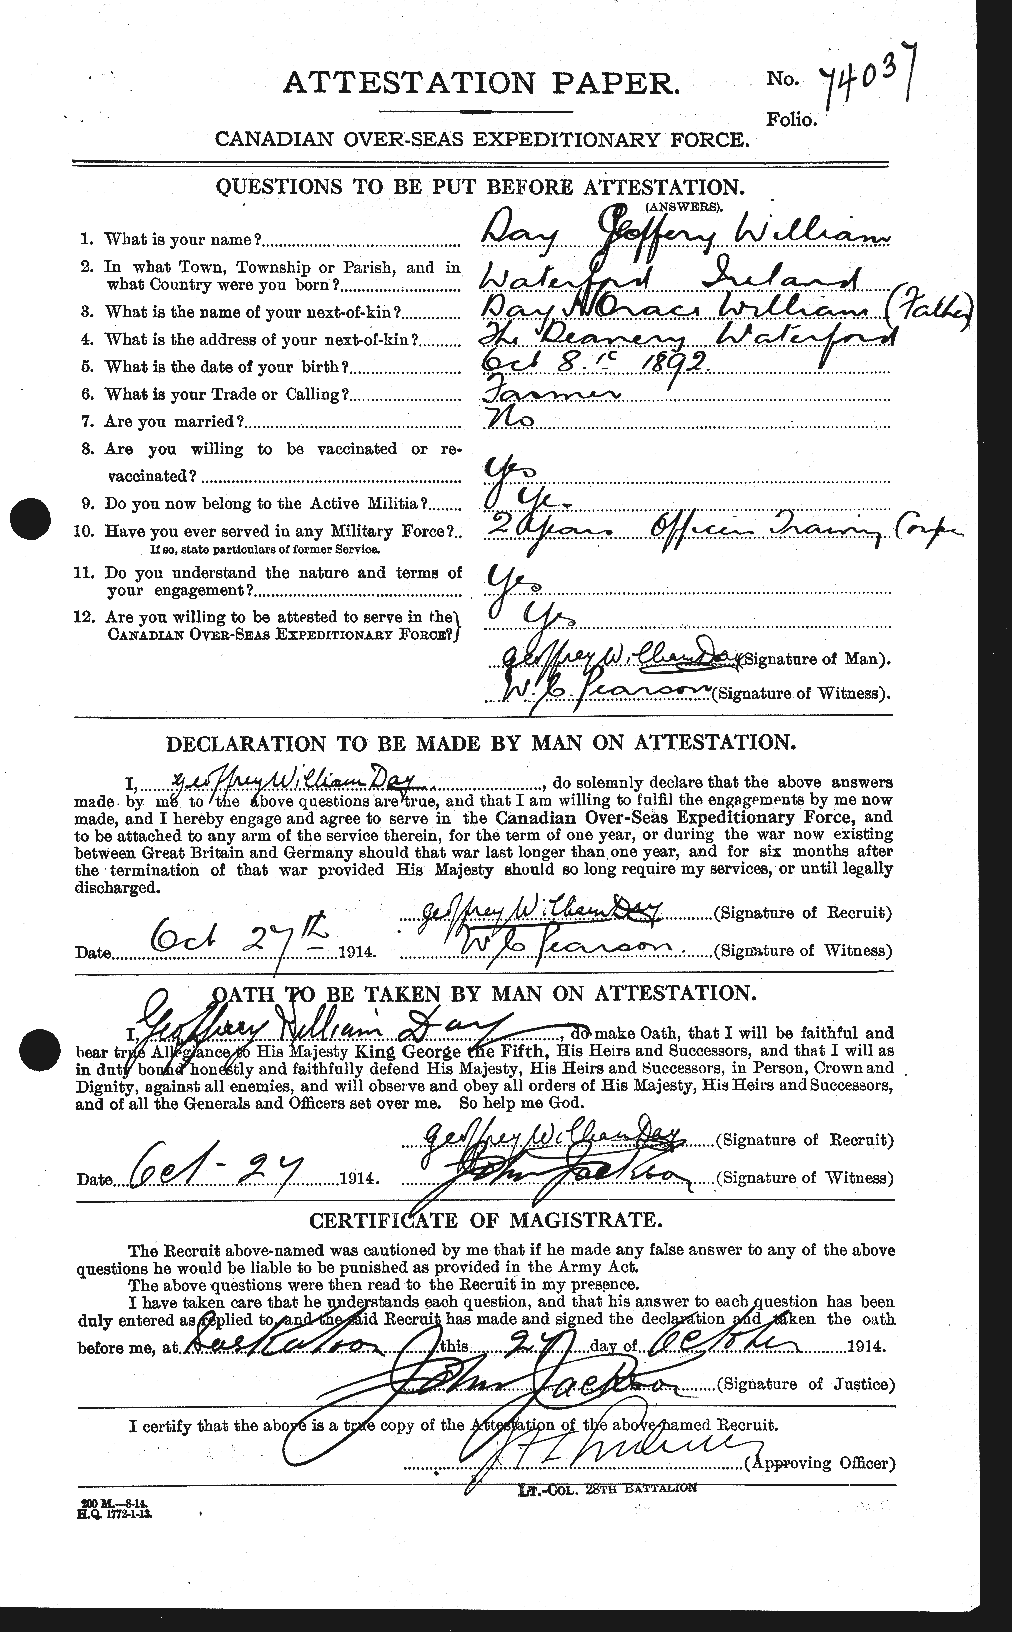 Personnel Records of the First World War - CEF 283063a